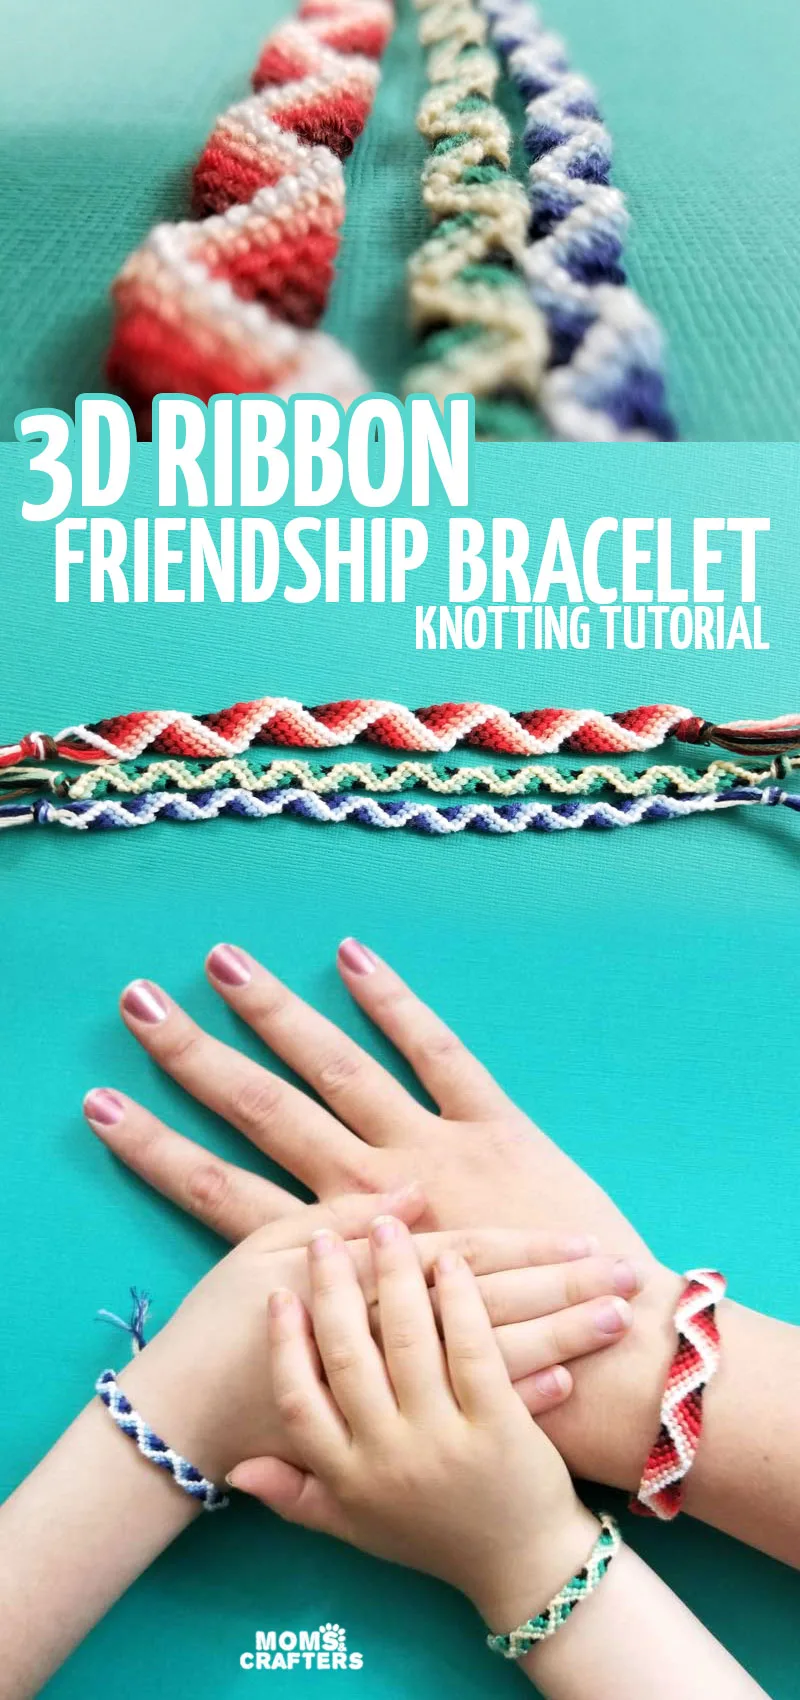 Click to learn how to mkae a 3D zig zag friendship bracelet from embroidery floss. This fun bracelet knotting tutorial is a fun jewelry making and summer crafts for teens and tweens. 